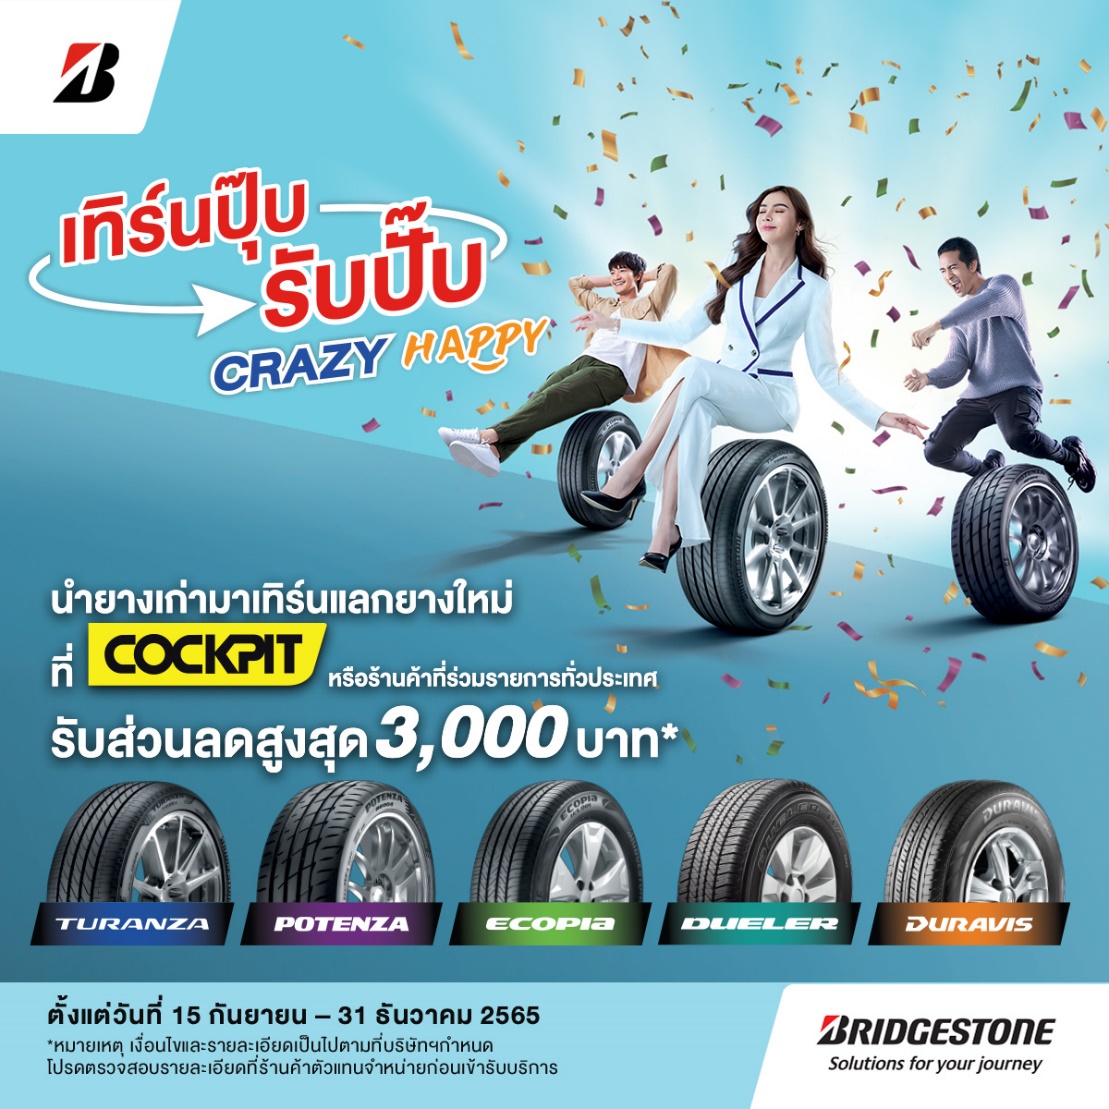 Bridgestone Launches CRAZY HAPPY Promotion, Trade in Your Old Tires with New Ones and Get a Maximum Discount of 3,000 Baht by the End of This